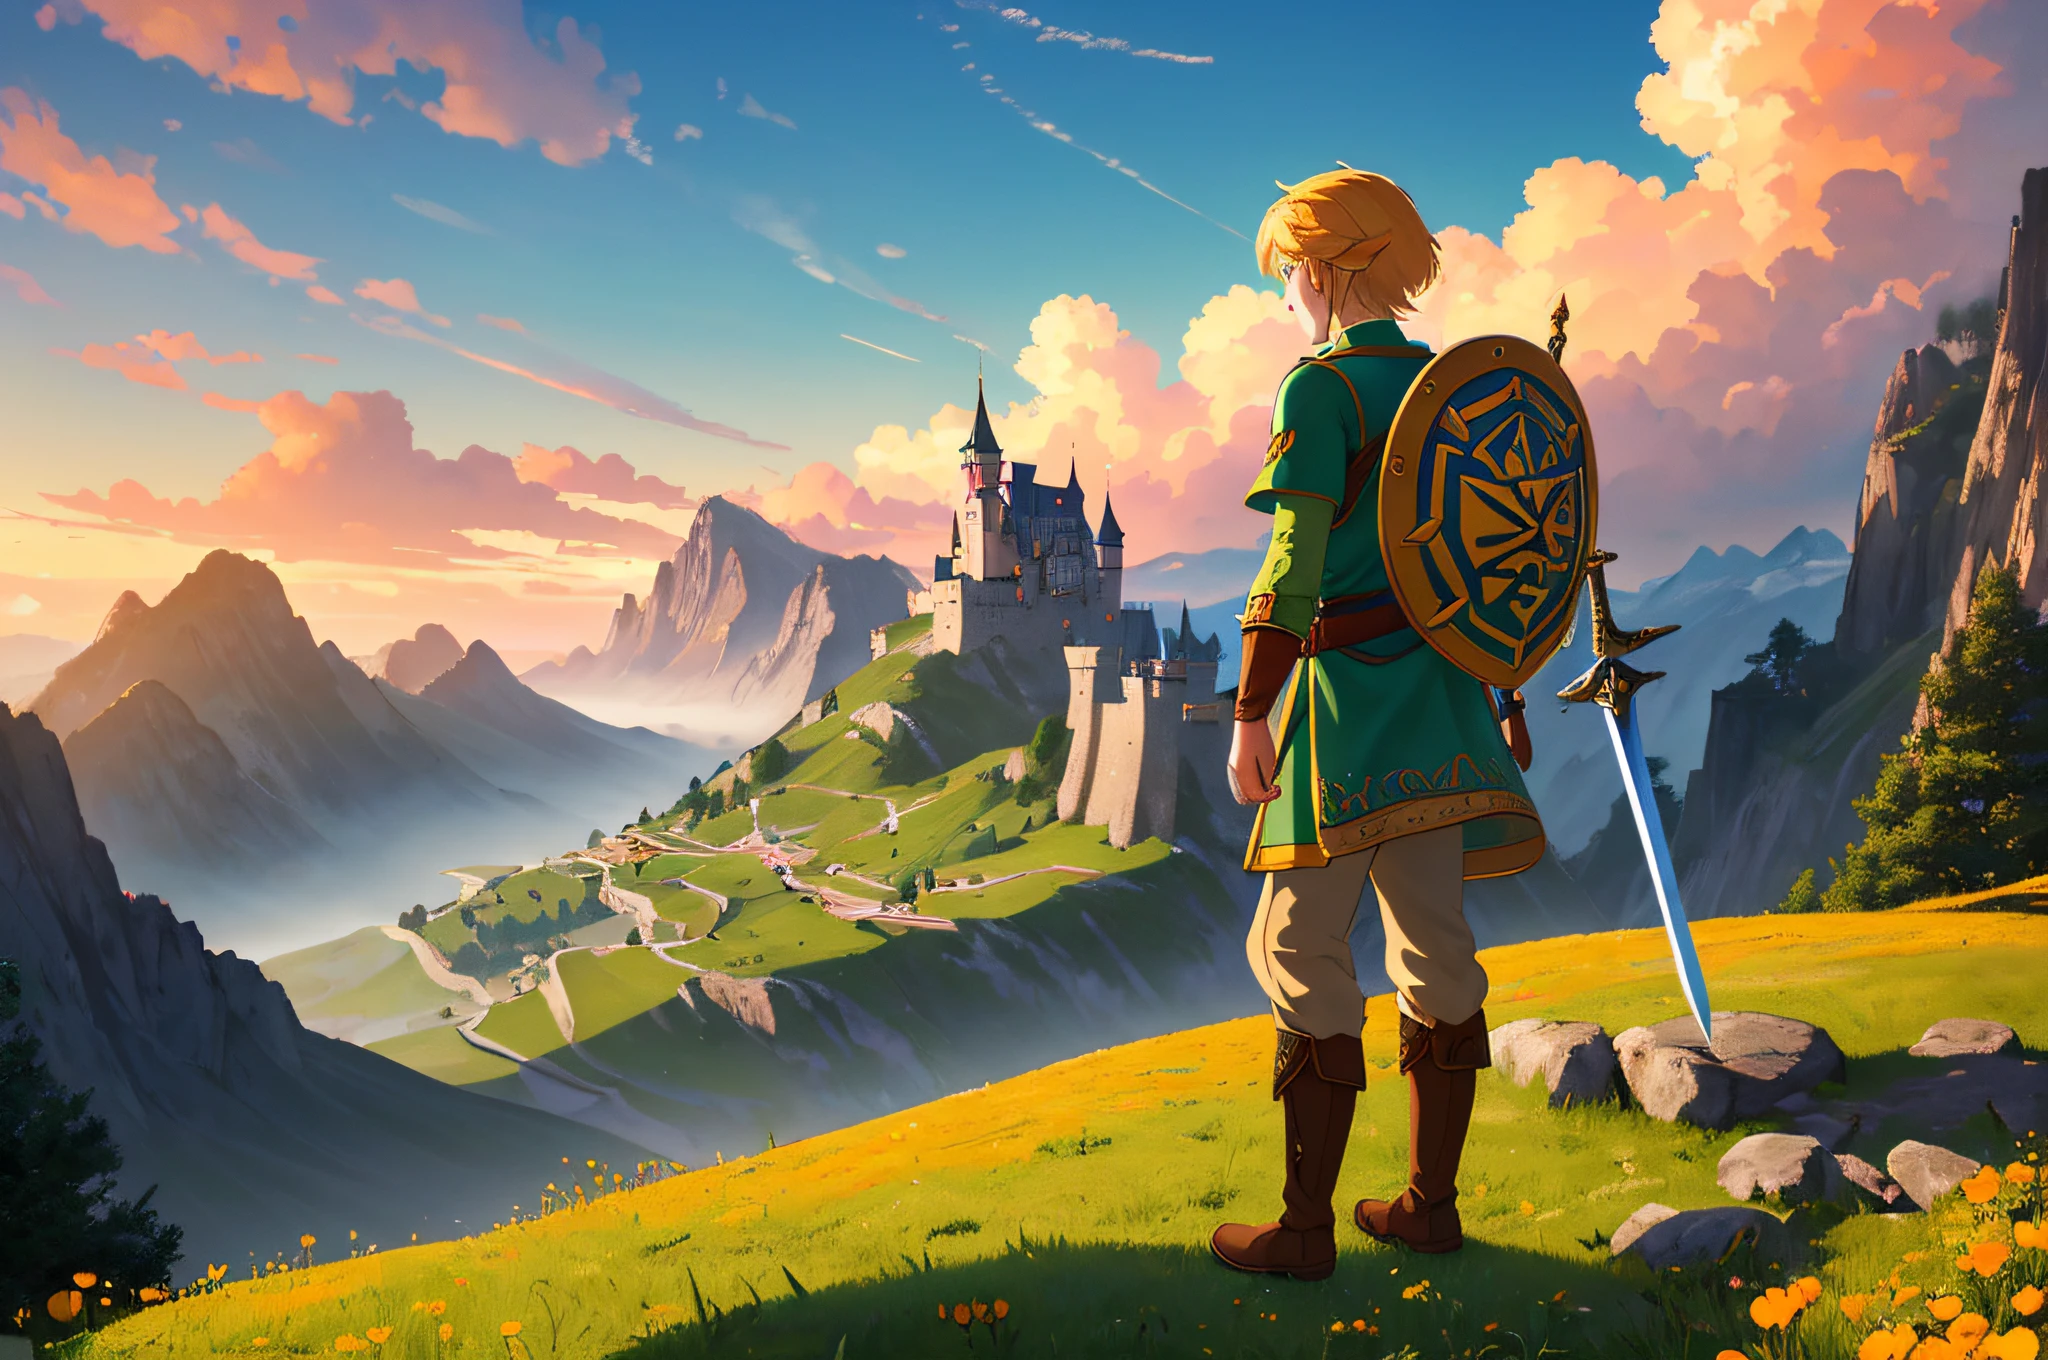 (best quality, 4k, high resolution, masterpiece: 1.2), ultra detailed, realistic,a young man standing on a cliff looking at a great landscape. The young man is wearing a green tunic, brown pants and boots. He has a sword and a shield on his back. The landscape is made up of mountains, valleys and a castle in the distance. The sky is full of orange and yellow clouds, and the sun shines through them. The colors of the image are vibrant and the atmosphere is adventurous. Image taken from the Zelda game